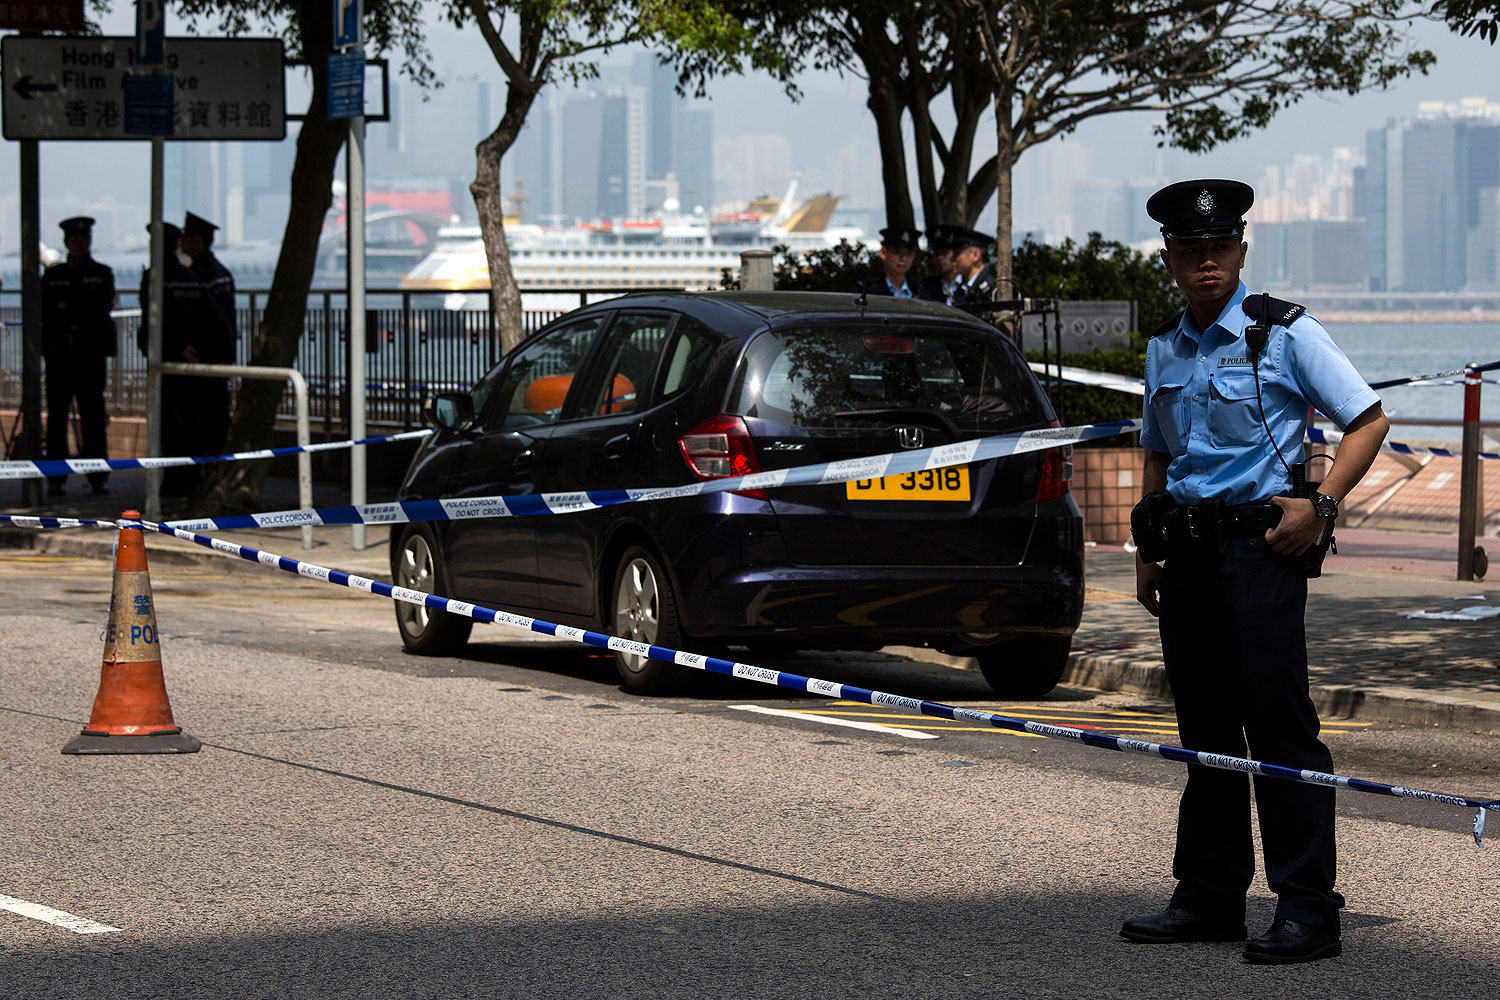 A policeman stands guard next to former Ming Pao chief editor Kevin Lau's car after Lau suffered from a chopper attack in Hong Kong Feb. 26, 2014 (Tyrone Siu / Reuters)